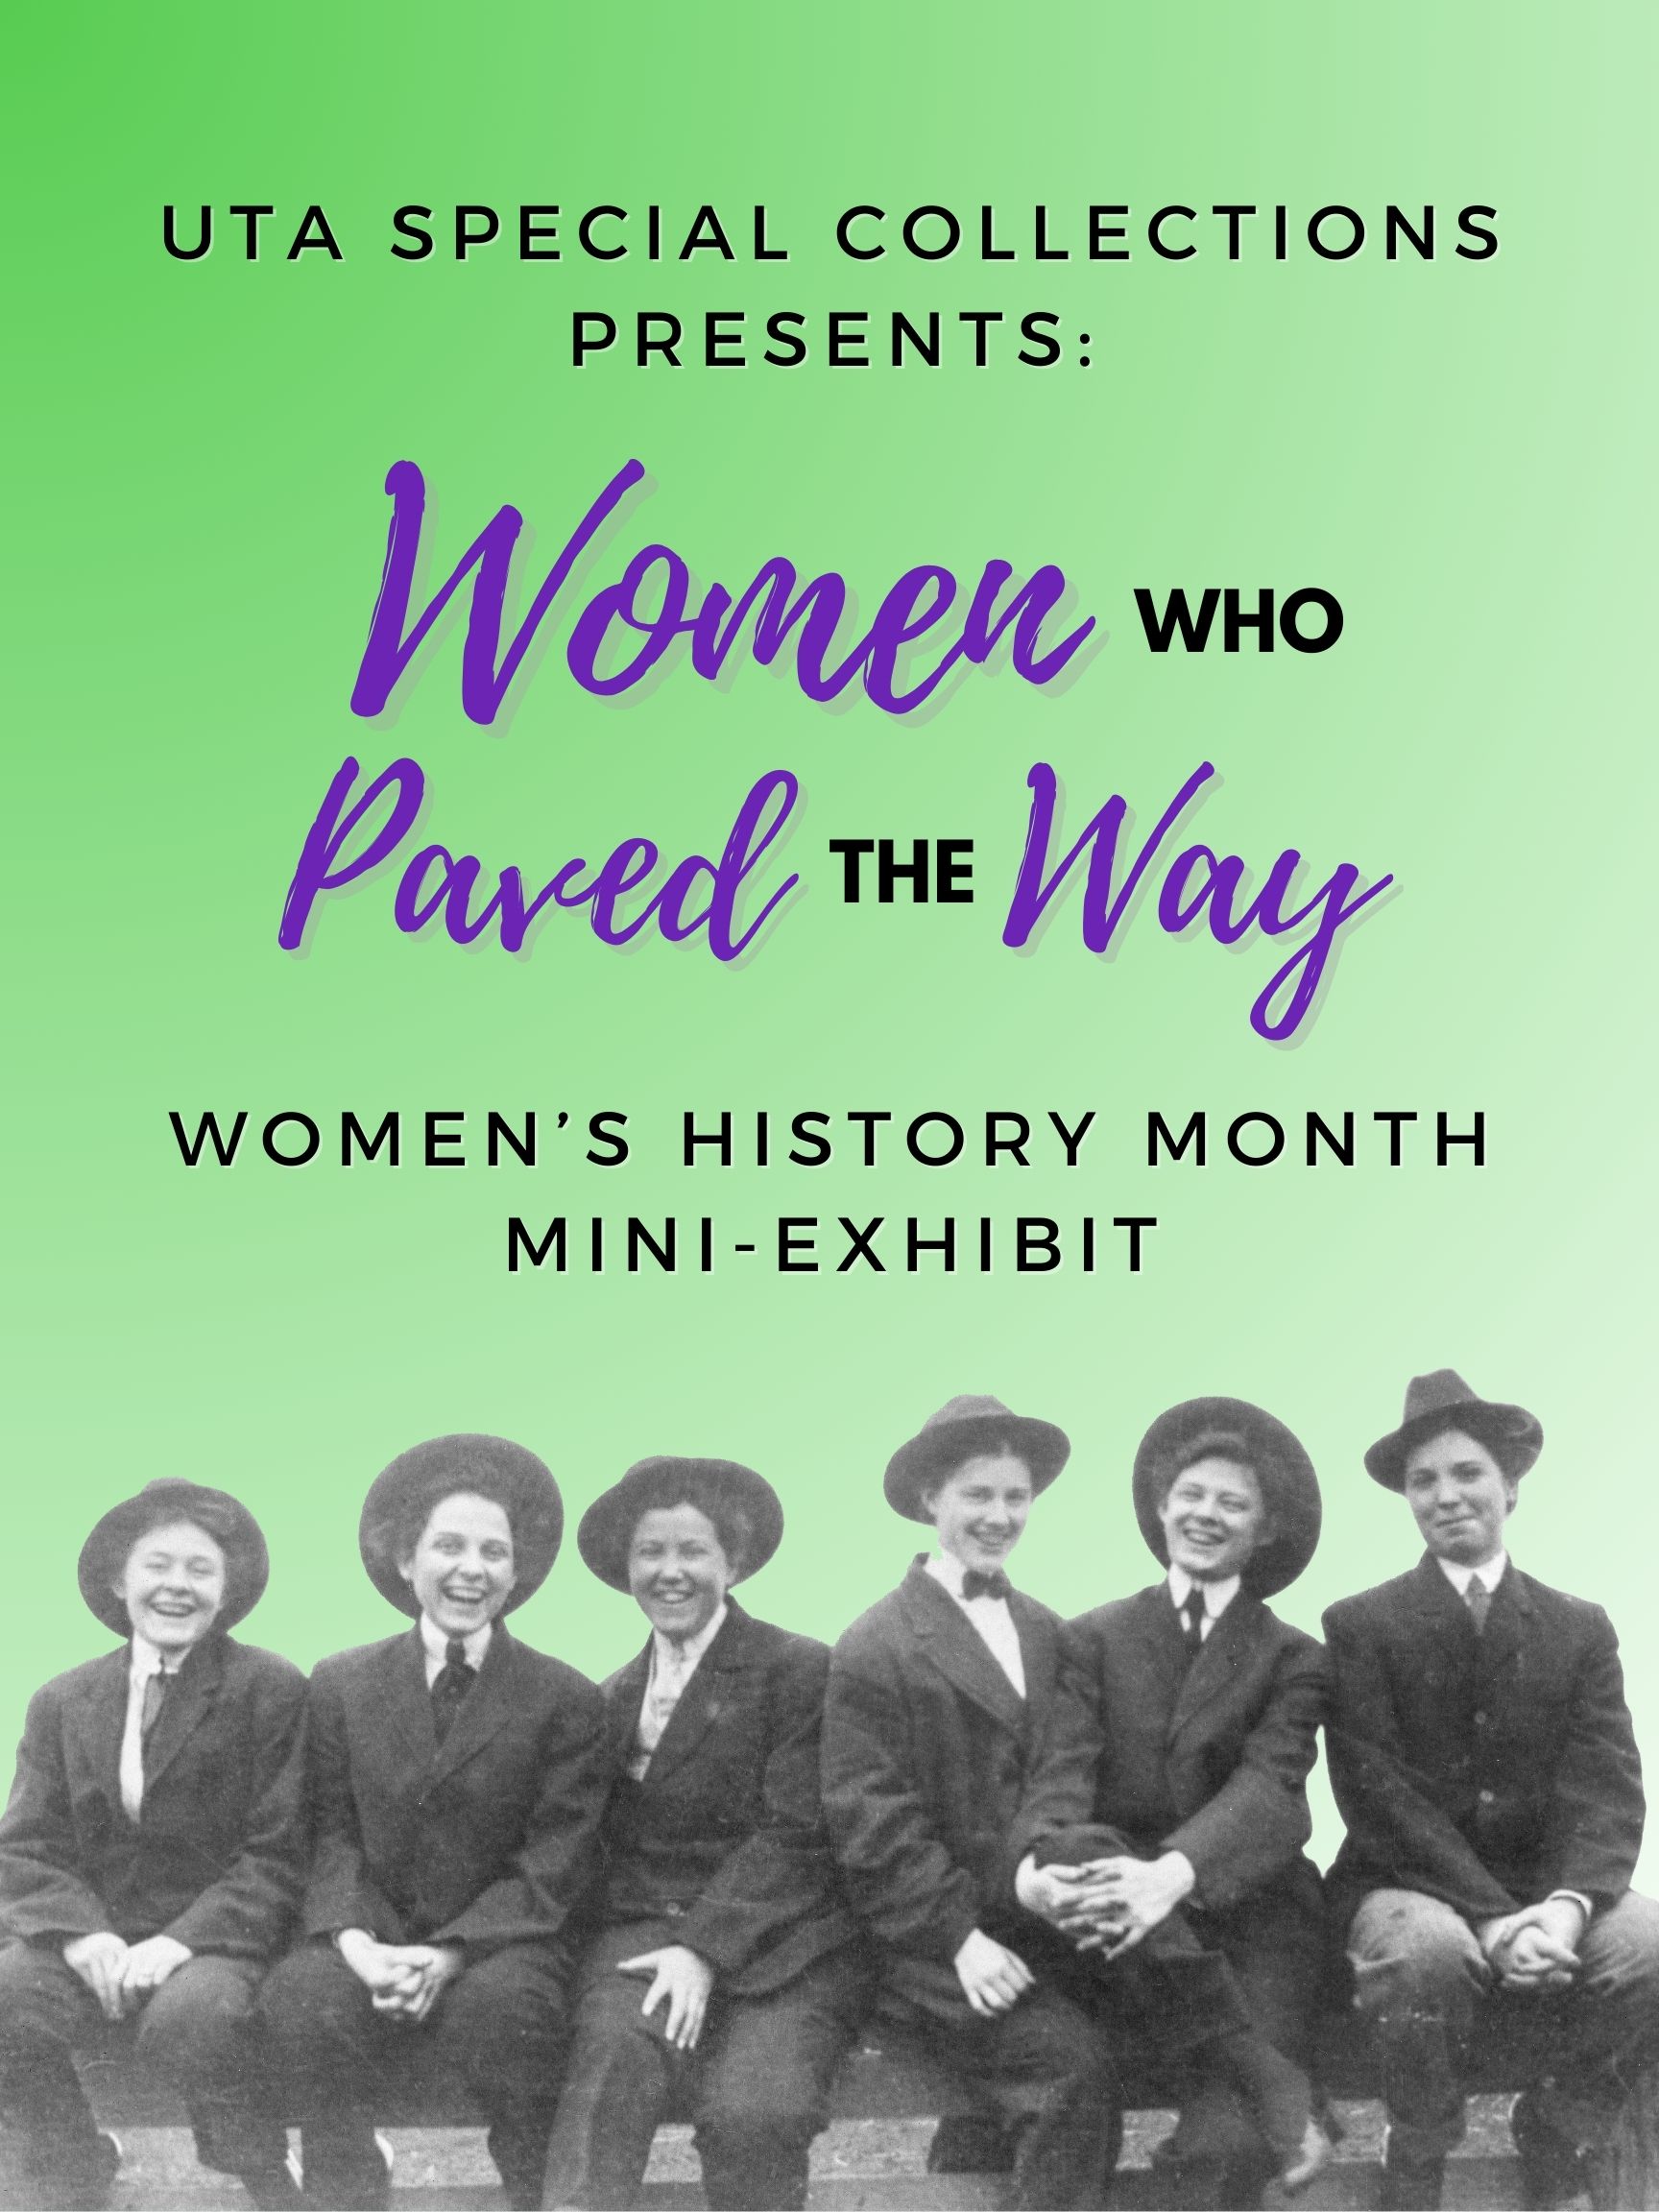 women who paved the way mini-exhibit poster